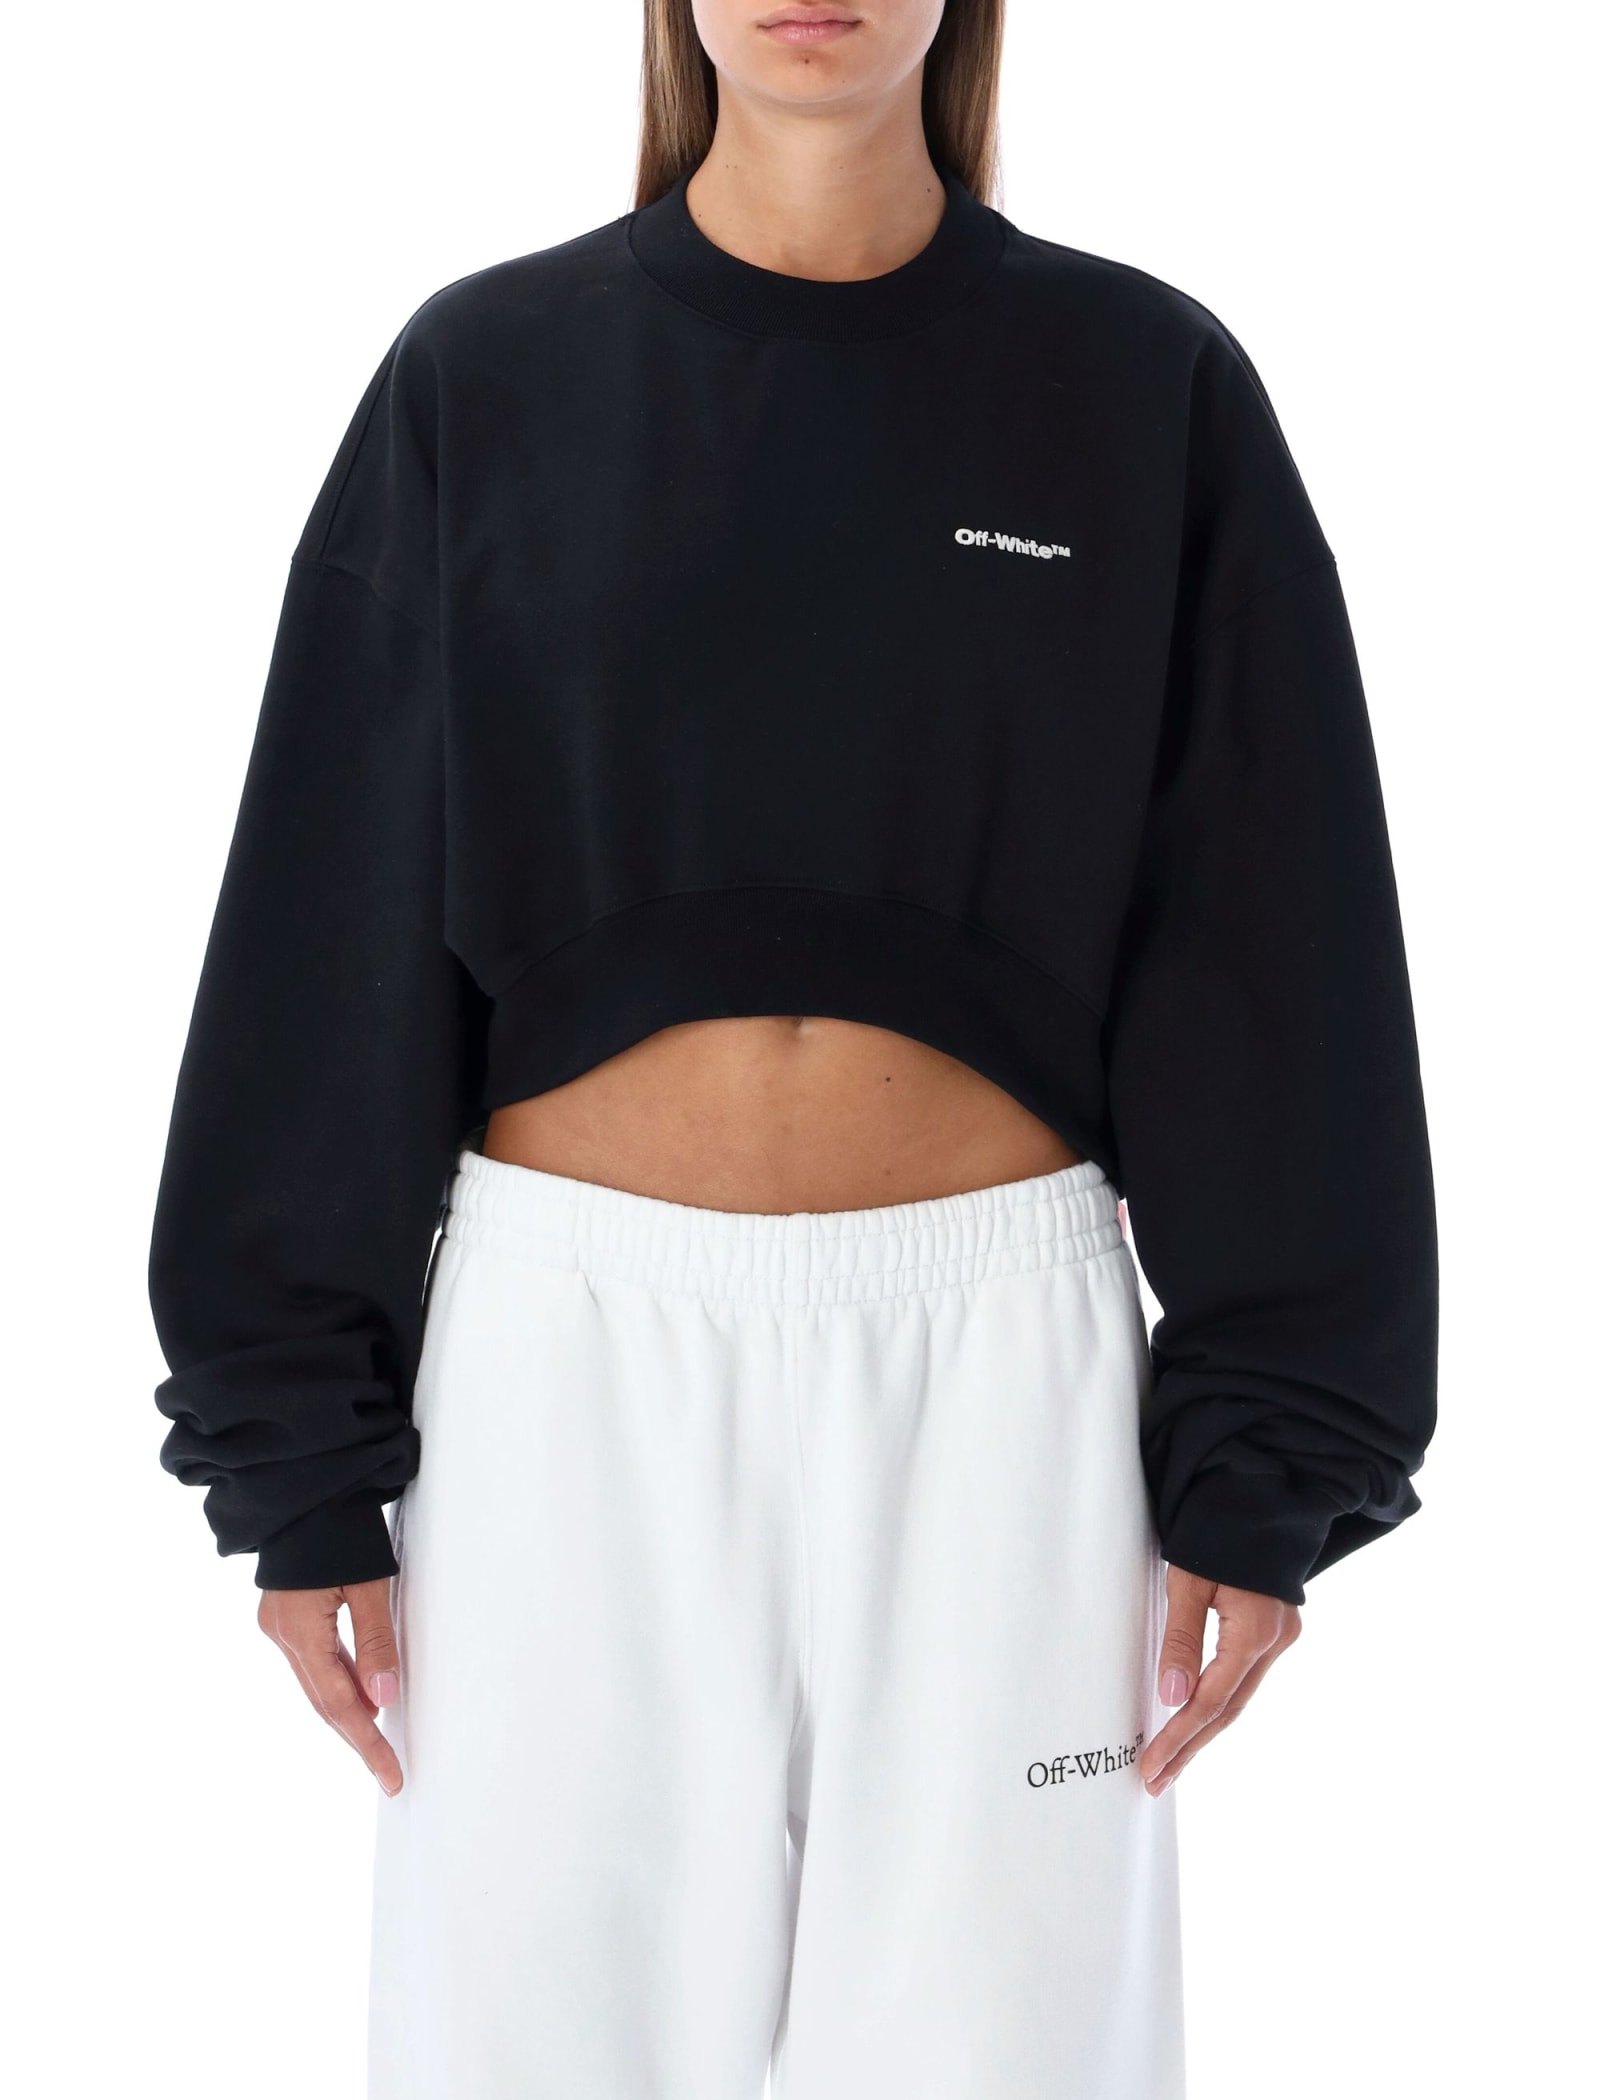 Off-White For All Crop Over Crewneck